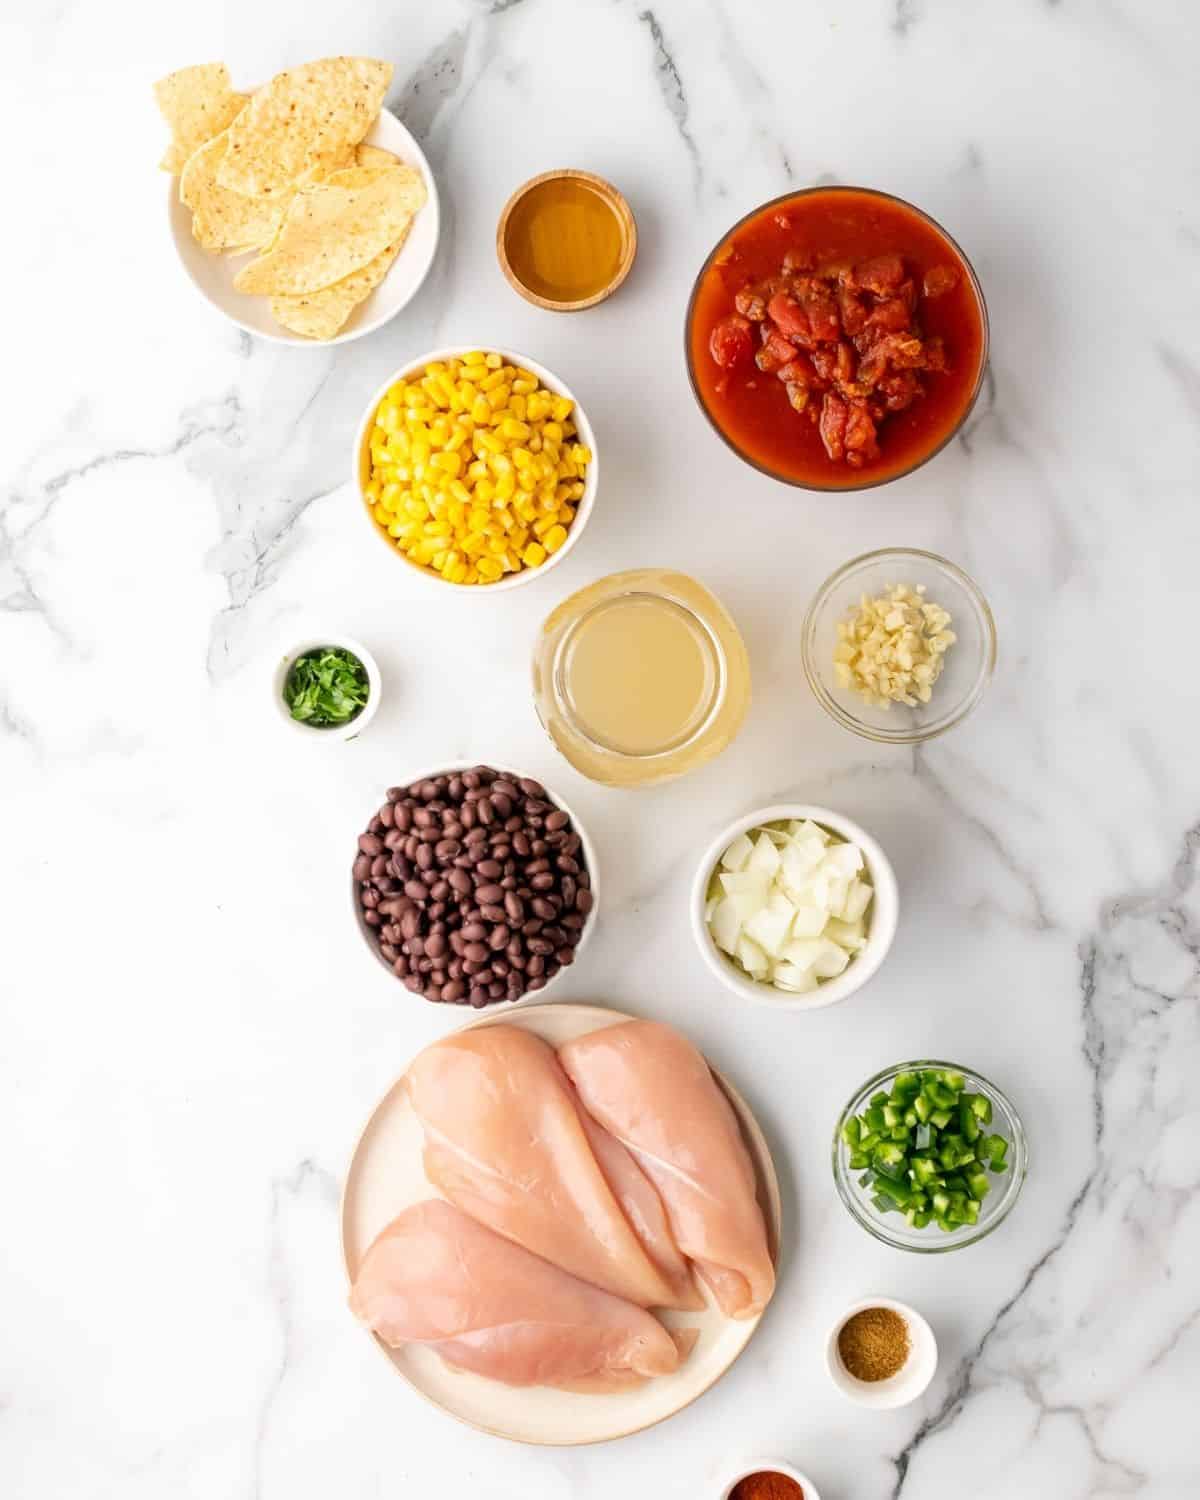 Ingredients to make easy chicken tortilla soup.